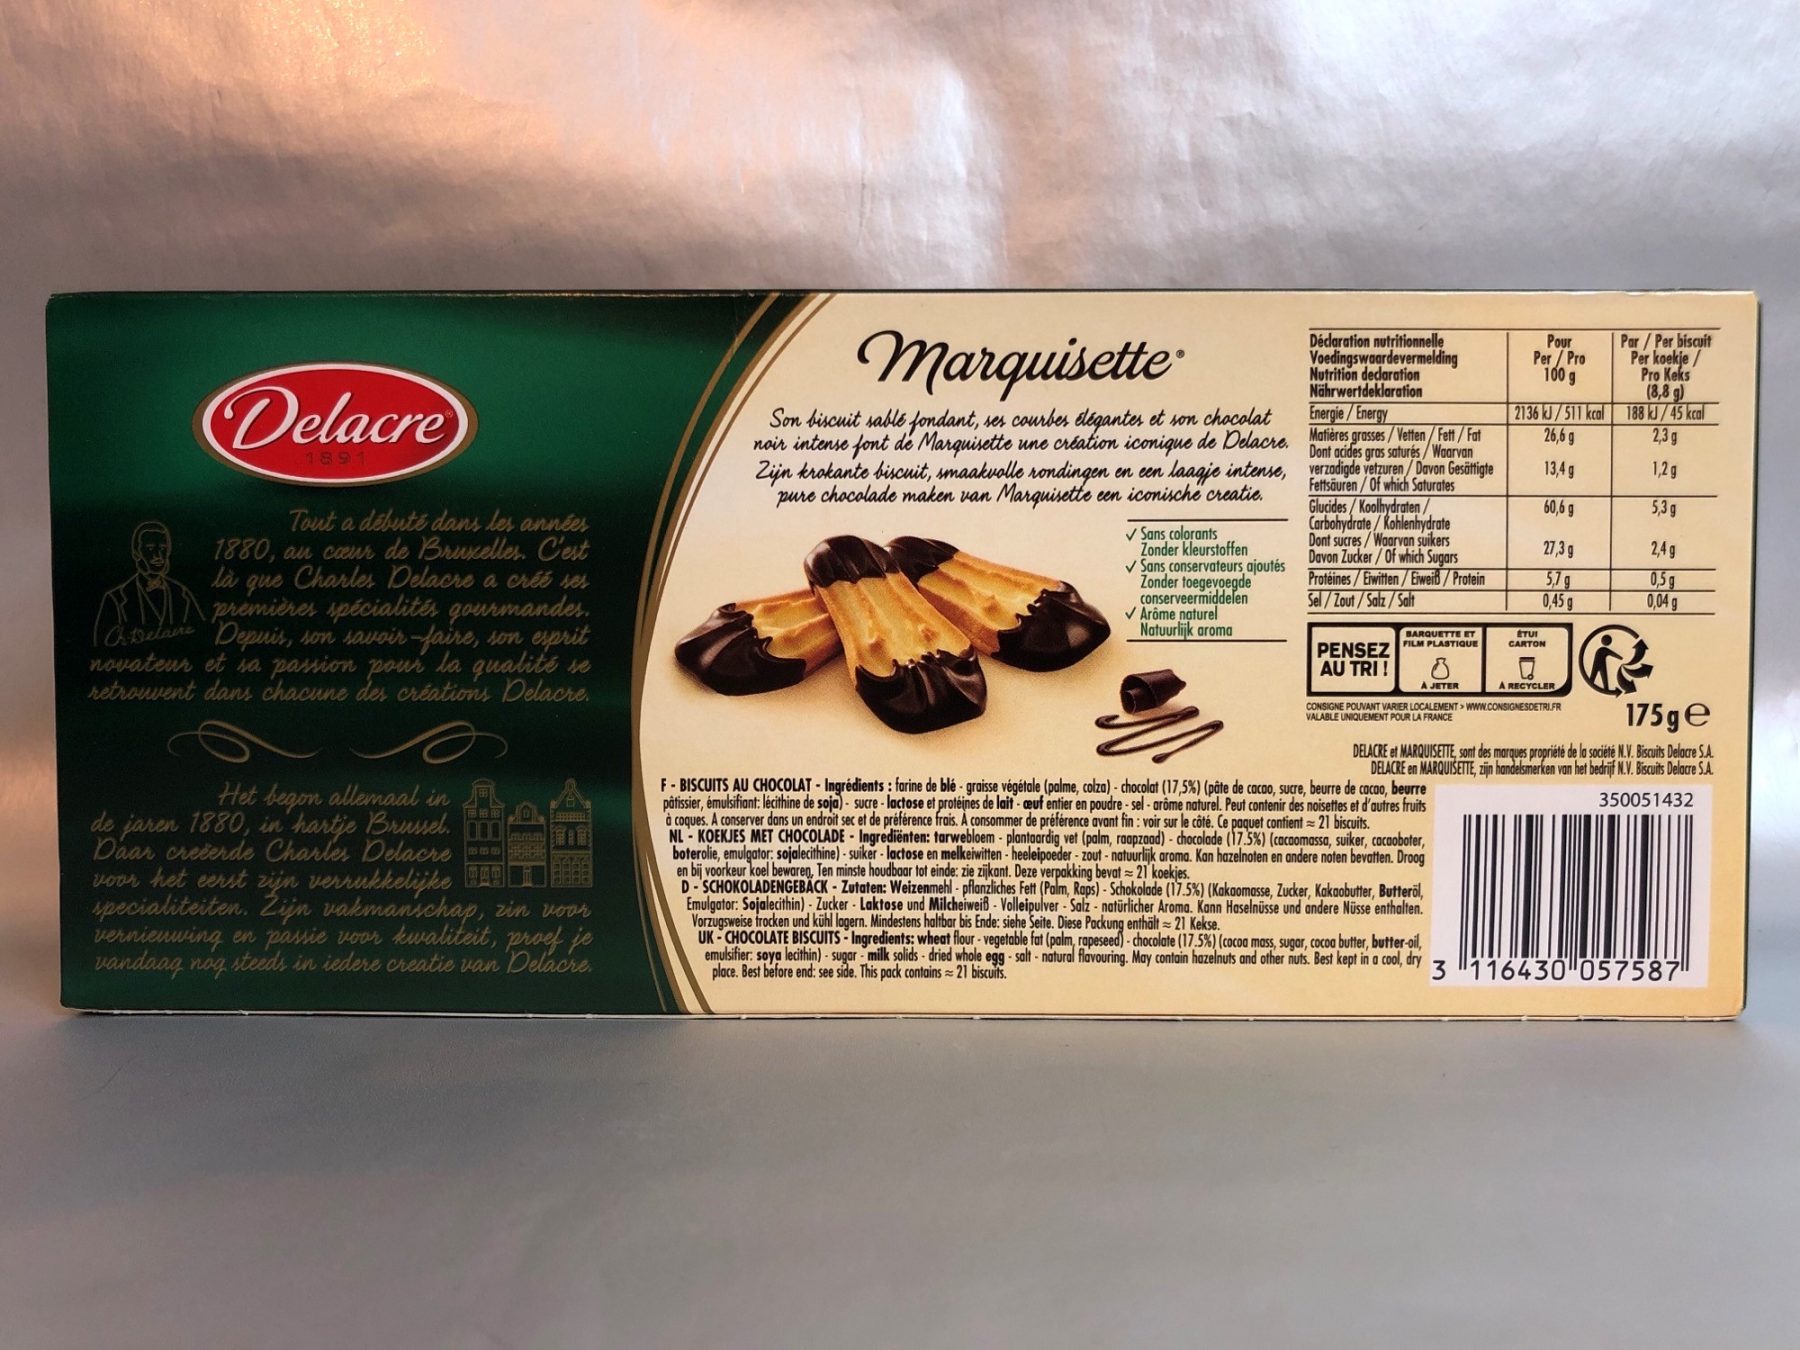 Delacre 'Marquisette' biscuits